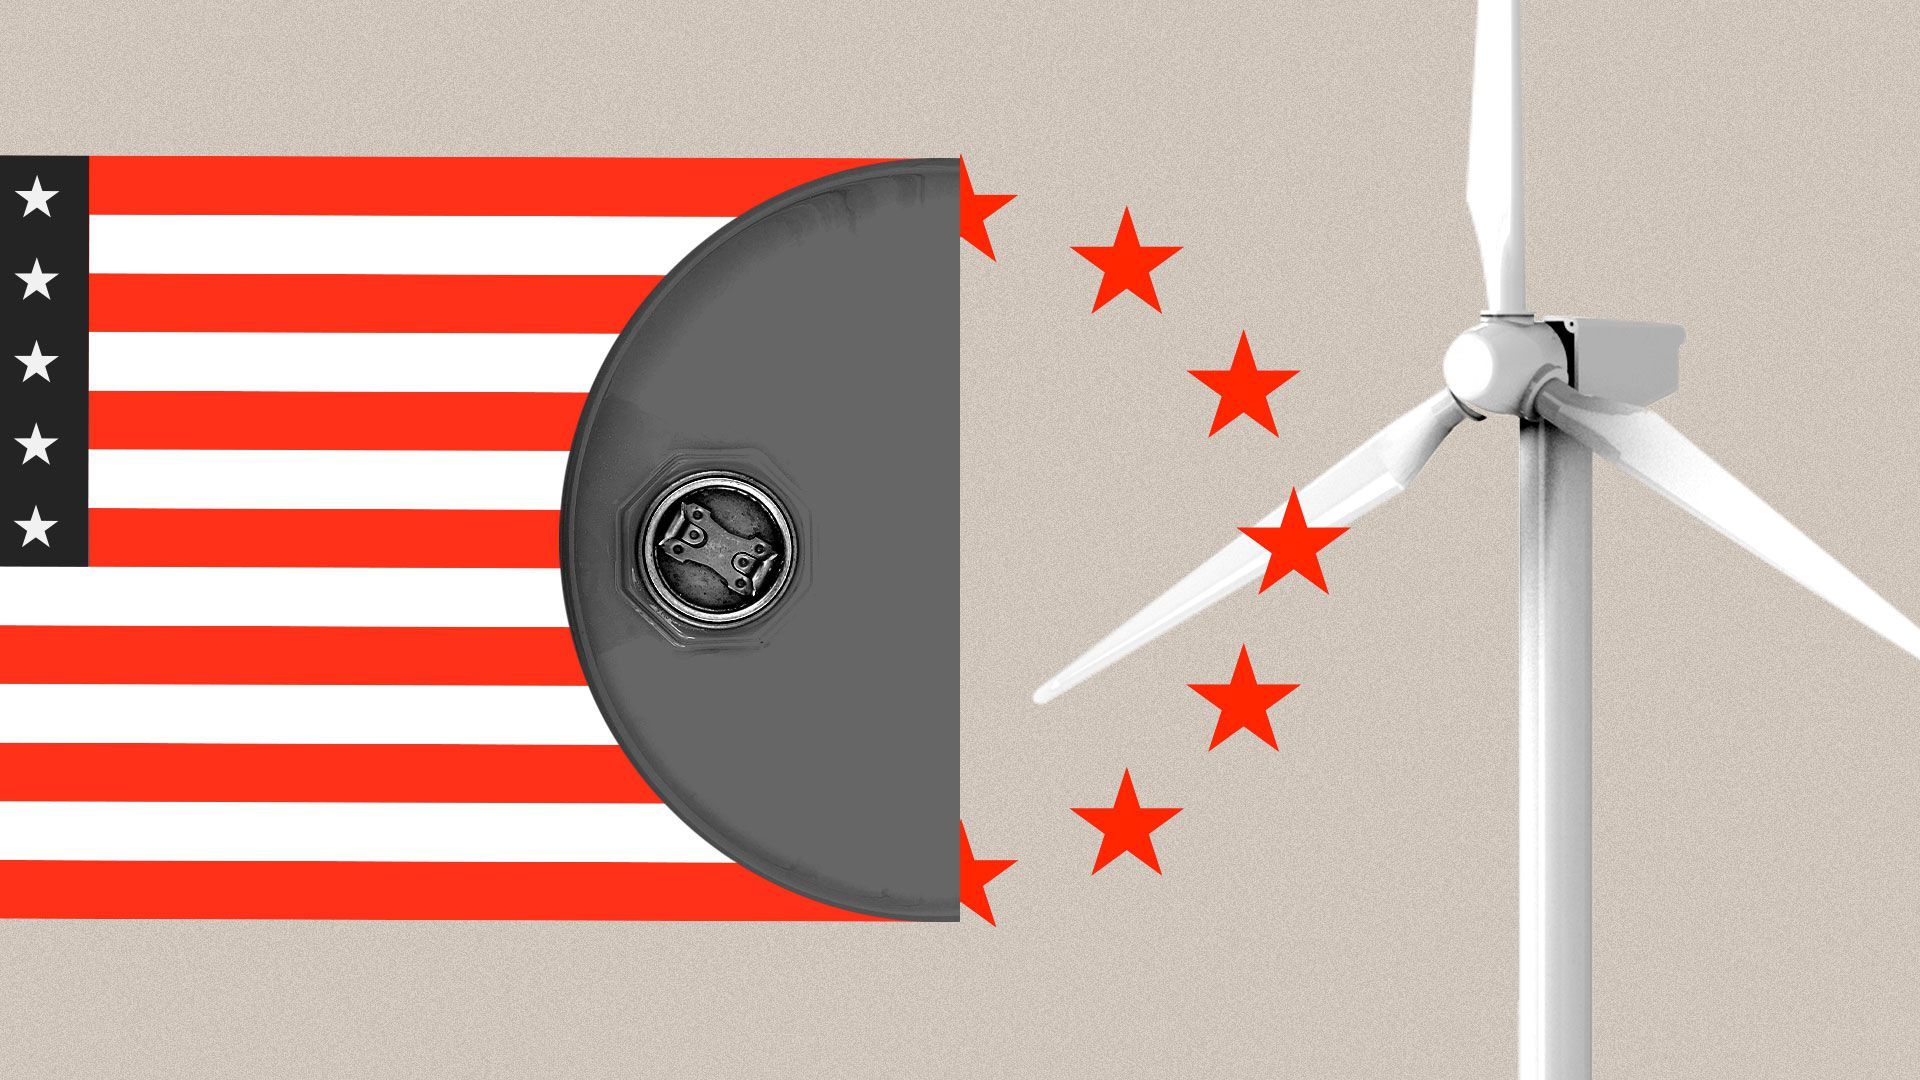 Illustrated collage of the American flag, the EU stars, an oil drum and a wind turbine. 